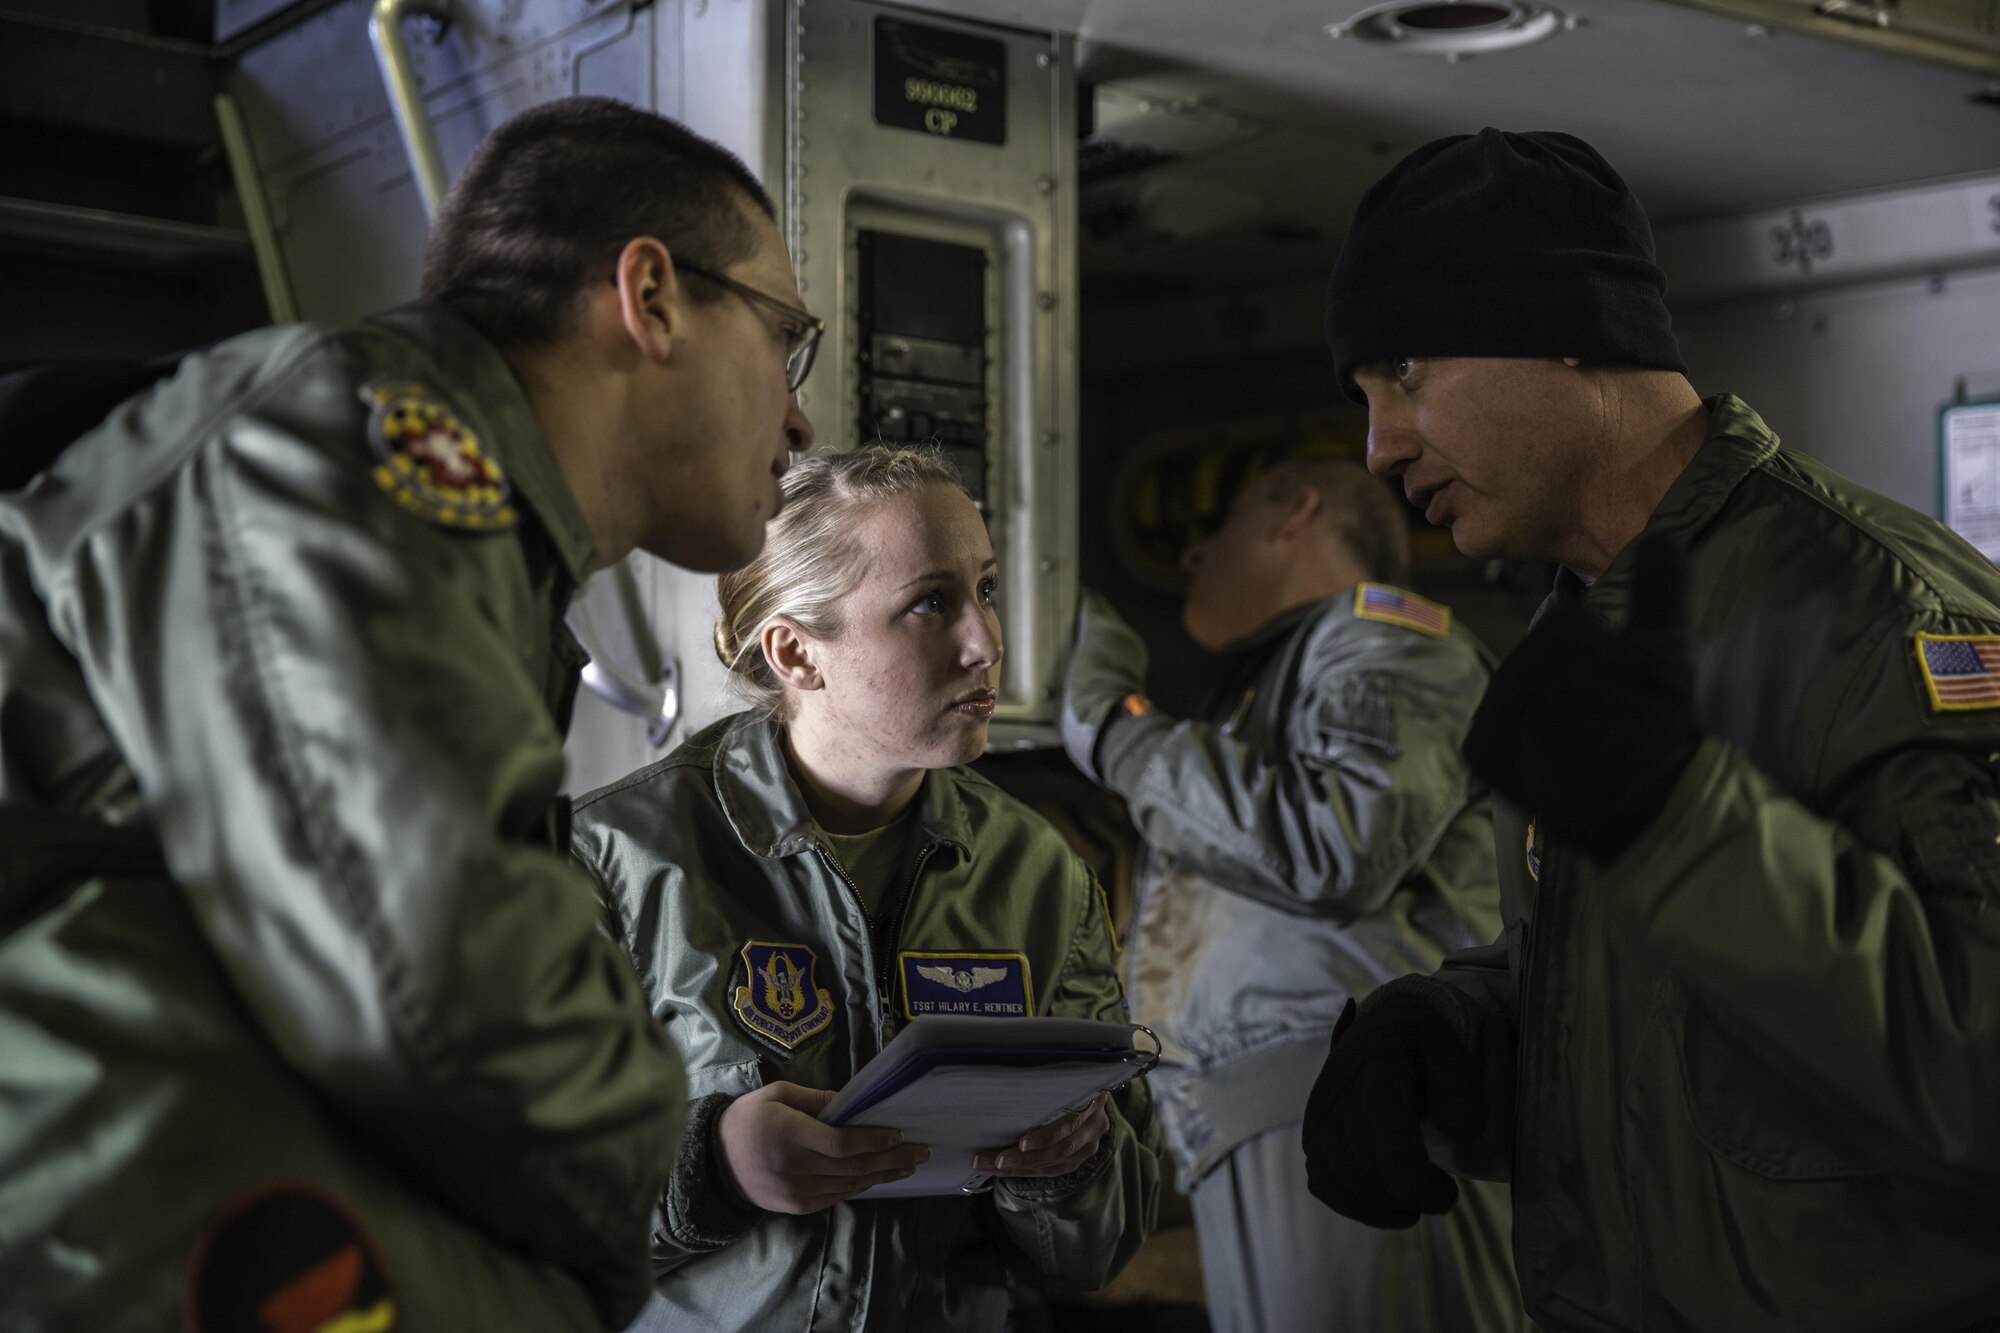 Tech. Sgt. Arrin Baker discusses load plan and patient configuration with Tech. Sgt. Hilary Rentner and Tech. Sgt. James Laska Feb. 21, 2015 during a training mission in San Juan, Puerto Rico. The training mission was part of a three day fly-away with Airmen from the 315th Airlift Wing at Joint Base Charleston, South Carolina and aeromedical Airmen from the 459th Air Refueling Wing at Joint Base Andrews, Maryland. The training mission was a cost-effective means to accomplish currency items and evaluations for flight crew members and provided C-17 familiarization and proficiency training for aeromedical Airmen. Baker is a load master with the 300th Airlift Squadron. Rentner and Laska are aeromedical technicians with the 459th Aeromedical Evacuation Squadron. (U.S. Air Force Photo/Tech. Sgt. Shane Ellis)
